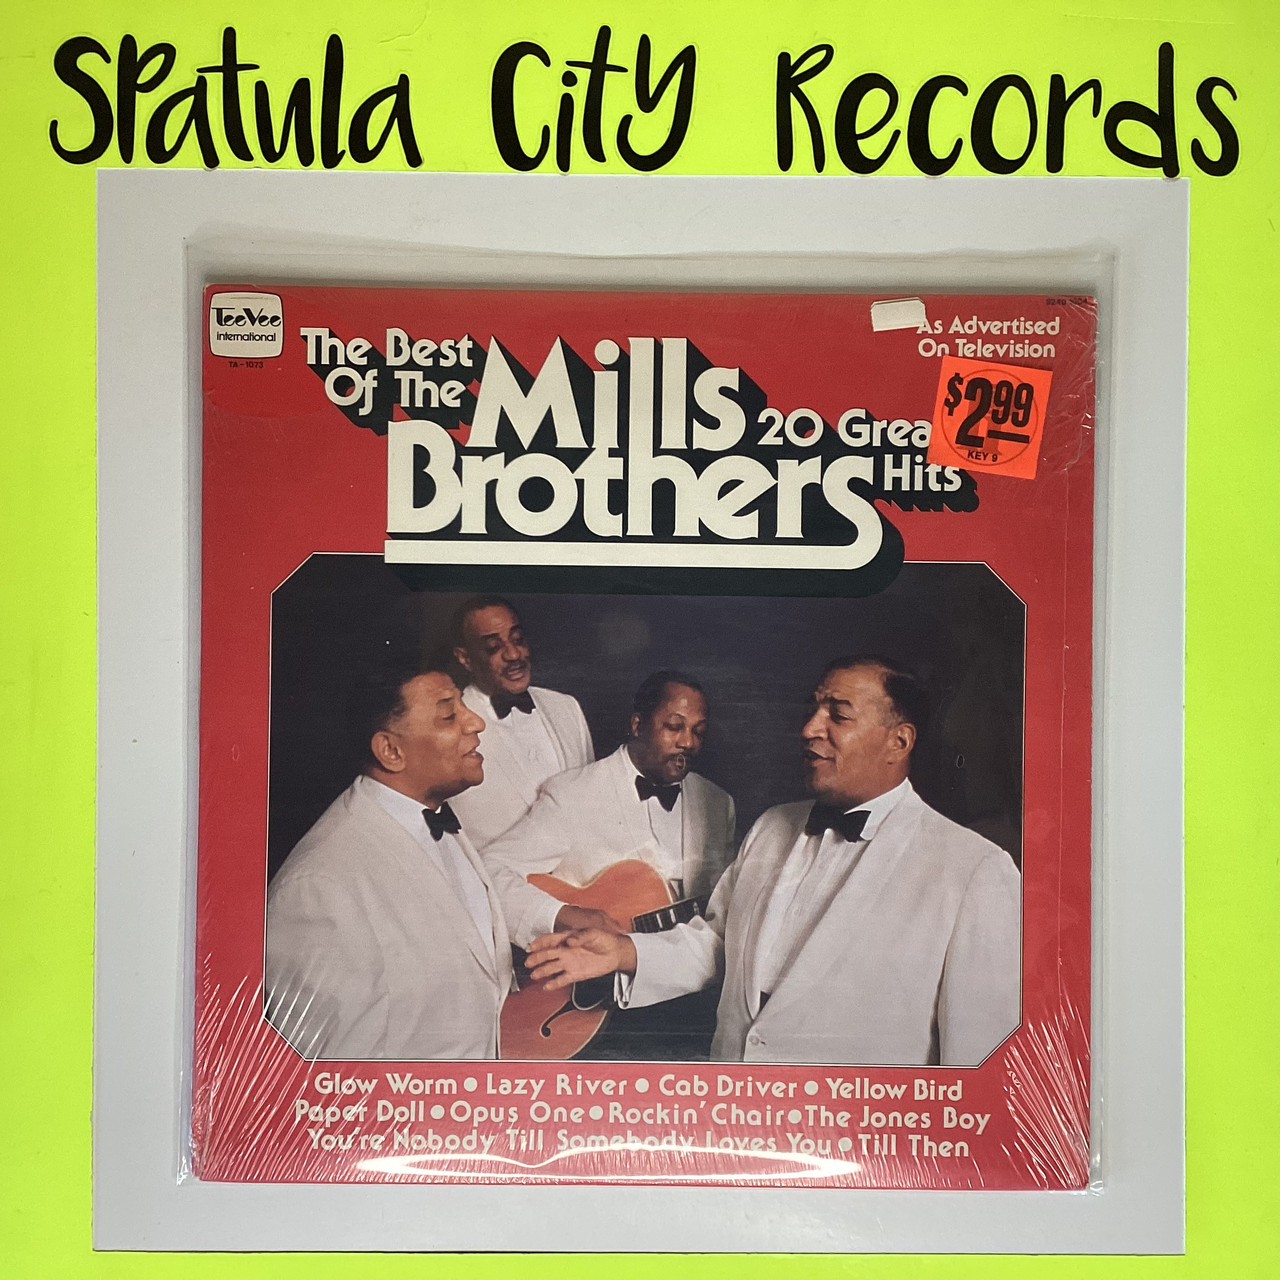 The Mills Brothers - The Best of The Mills Brothers: 20 Greatest Hits - CANADA IMPORT - SEALED - vinyl record LP